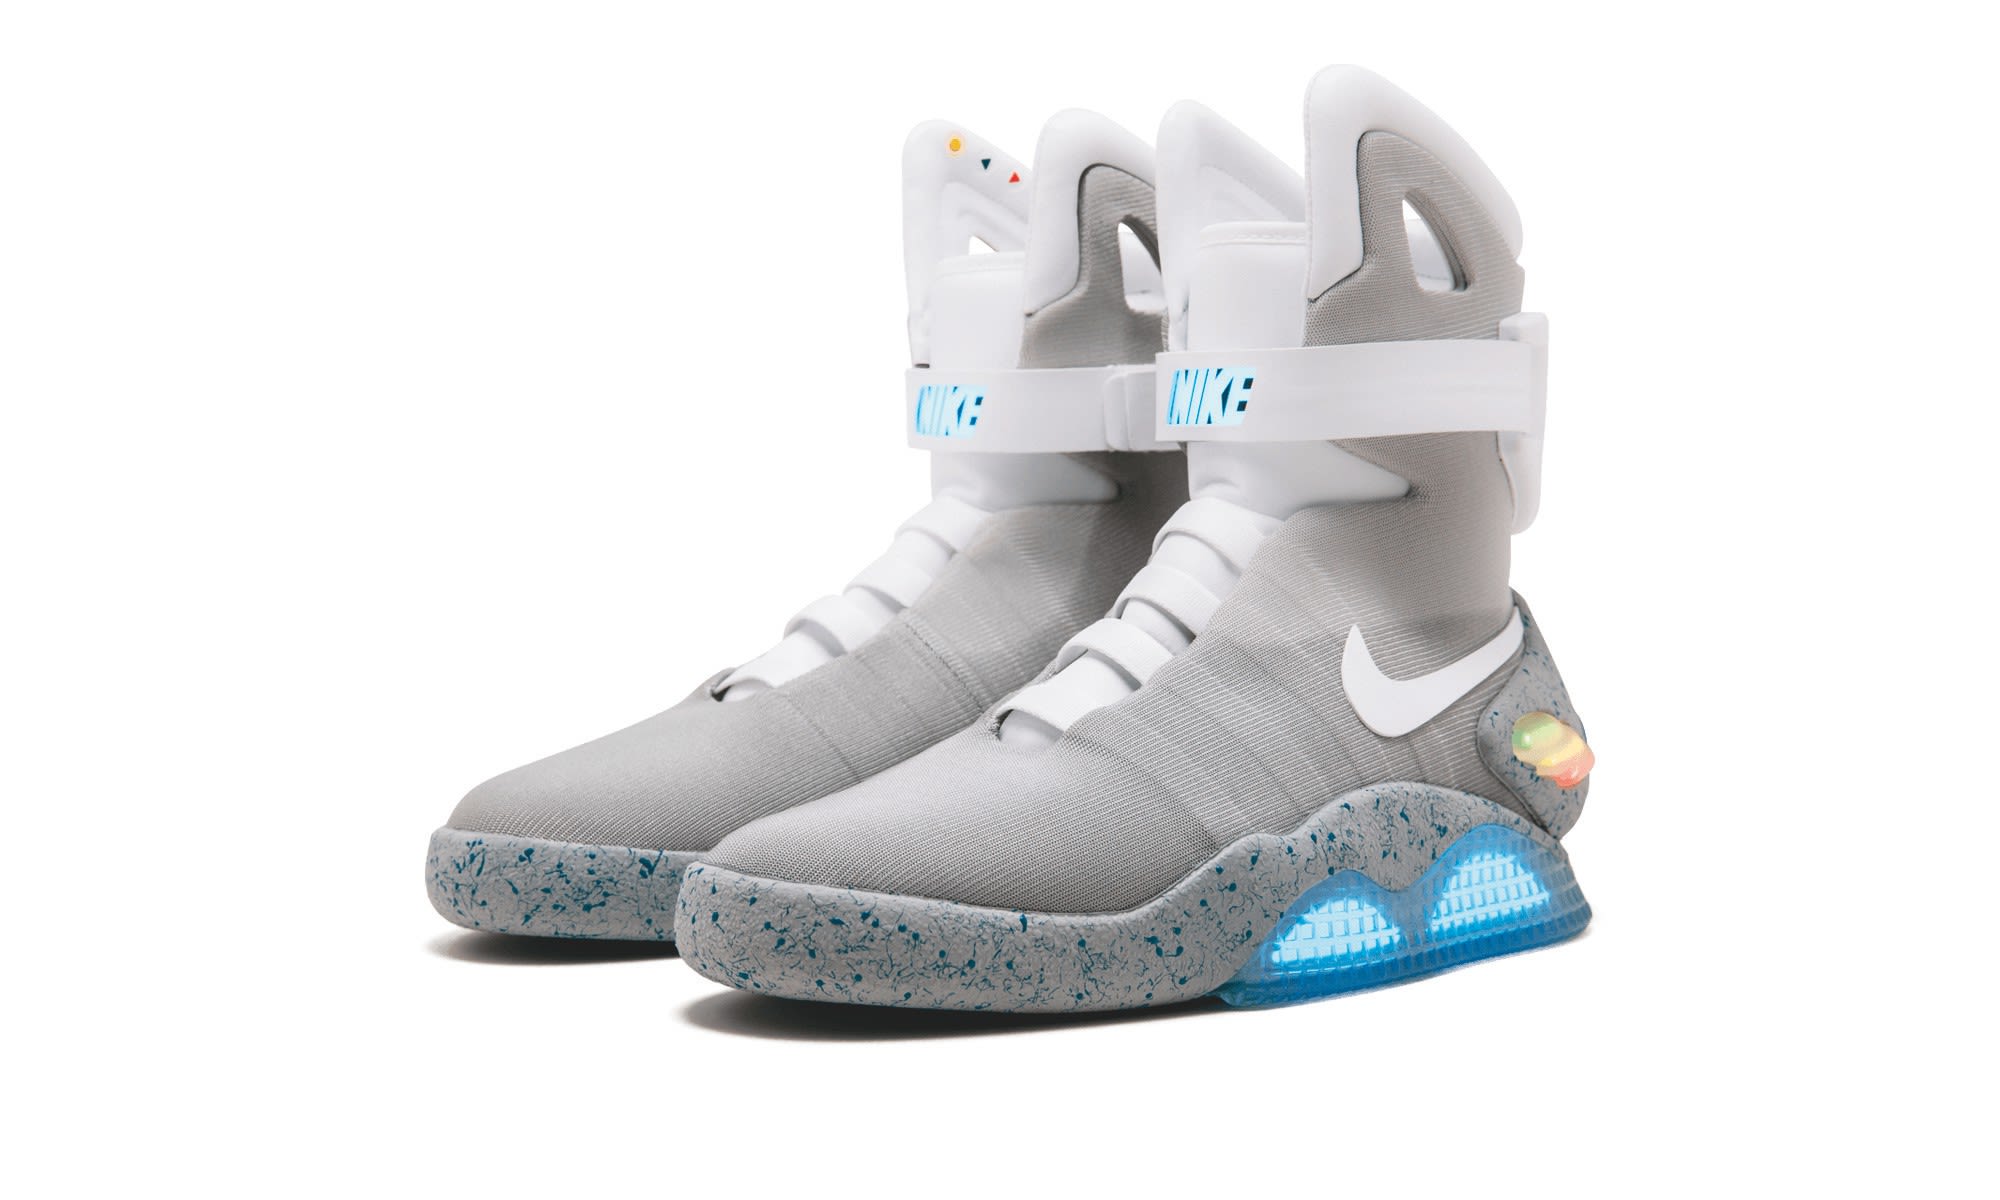 Nike 'moon shoes' and 'Back to the Future' sneakers up for auction